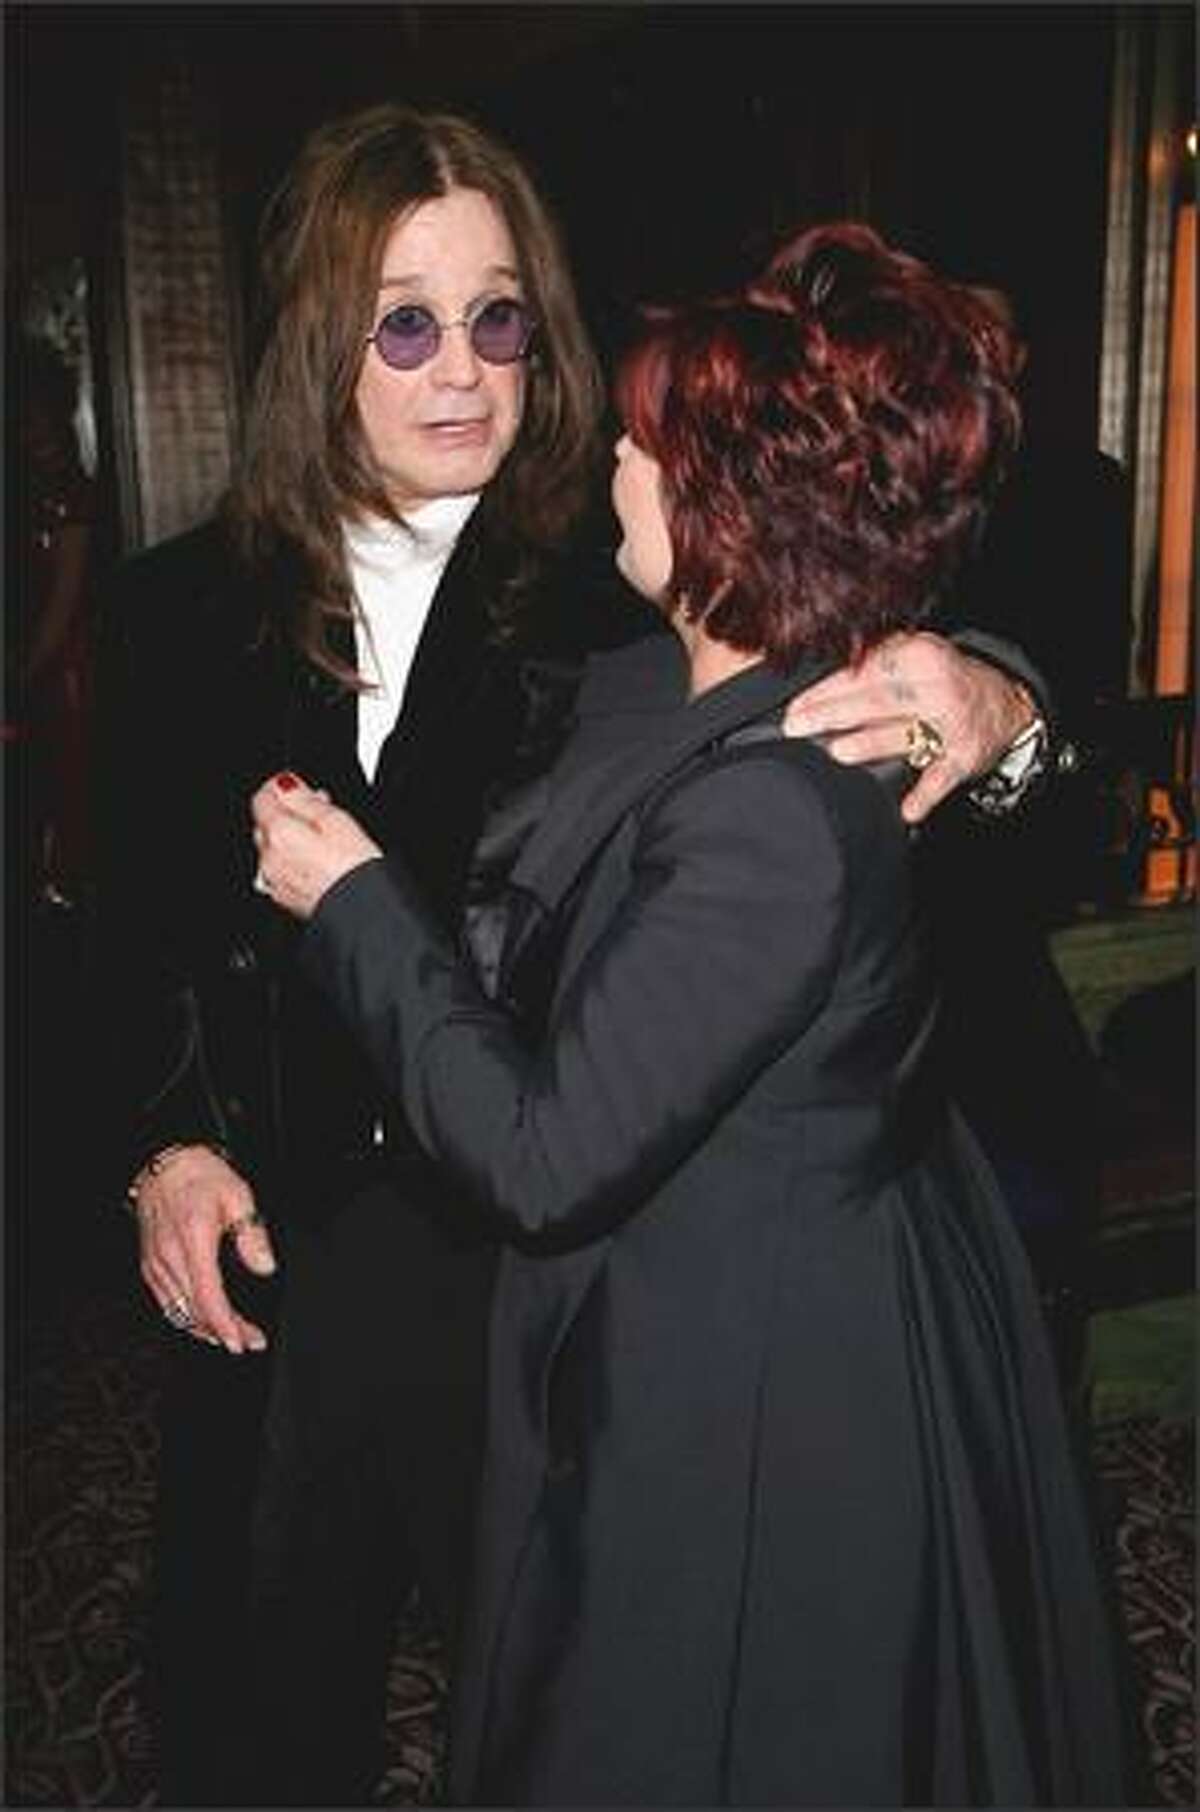 Ozzy Osbourne and Sharon Osbourne arrive for the Classic Rock Roll of Honour at the Park Lane Hotel on Monday in London.